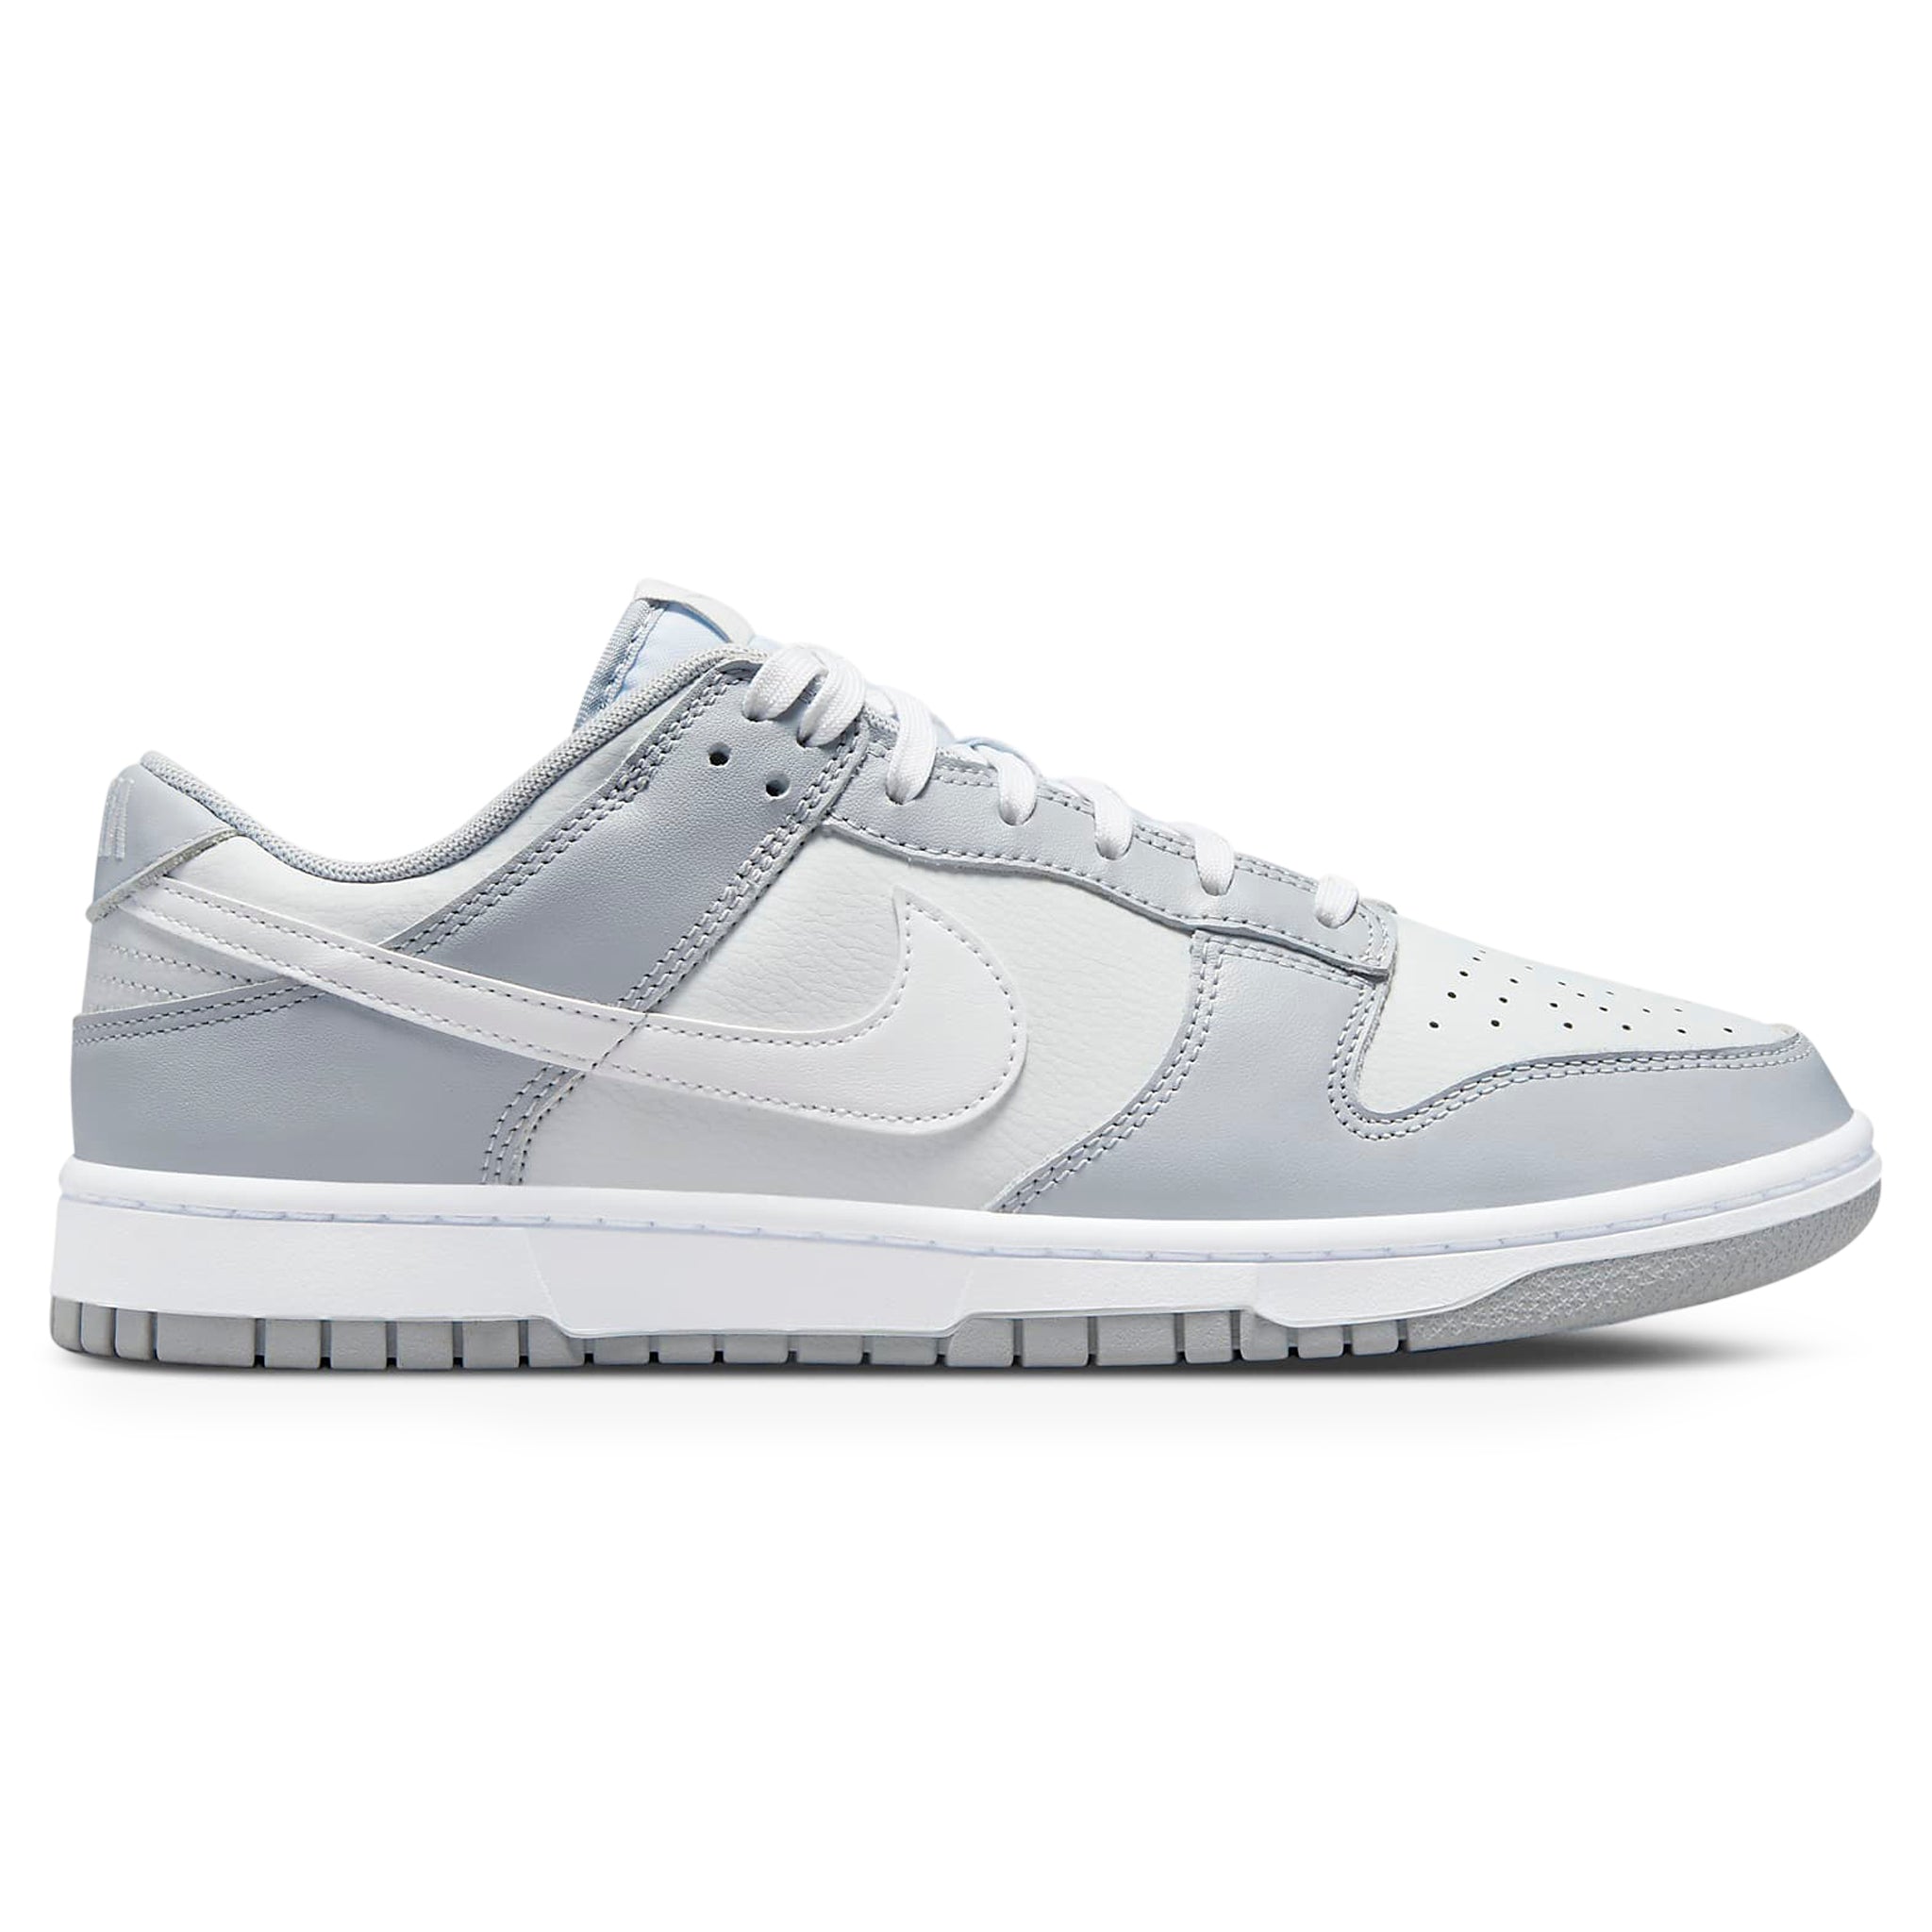 Side view of Nike Dunk Low Two Tone Grey DJ6188-001